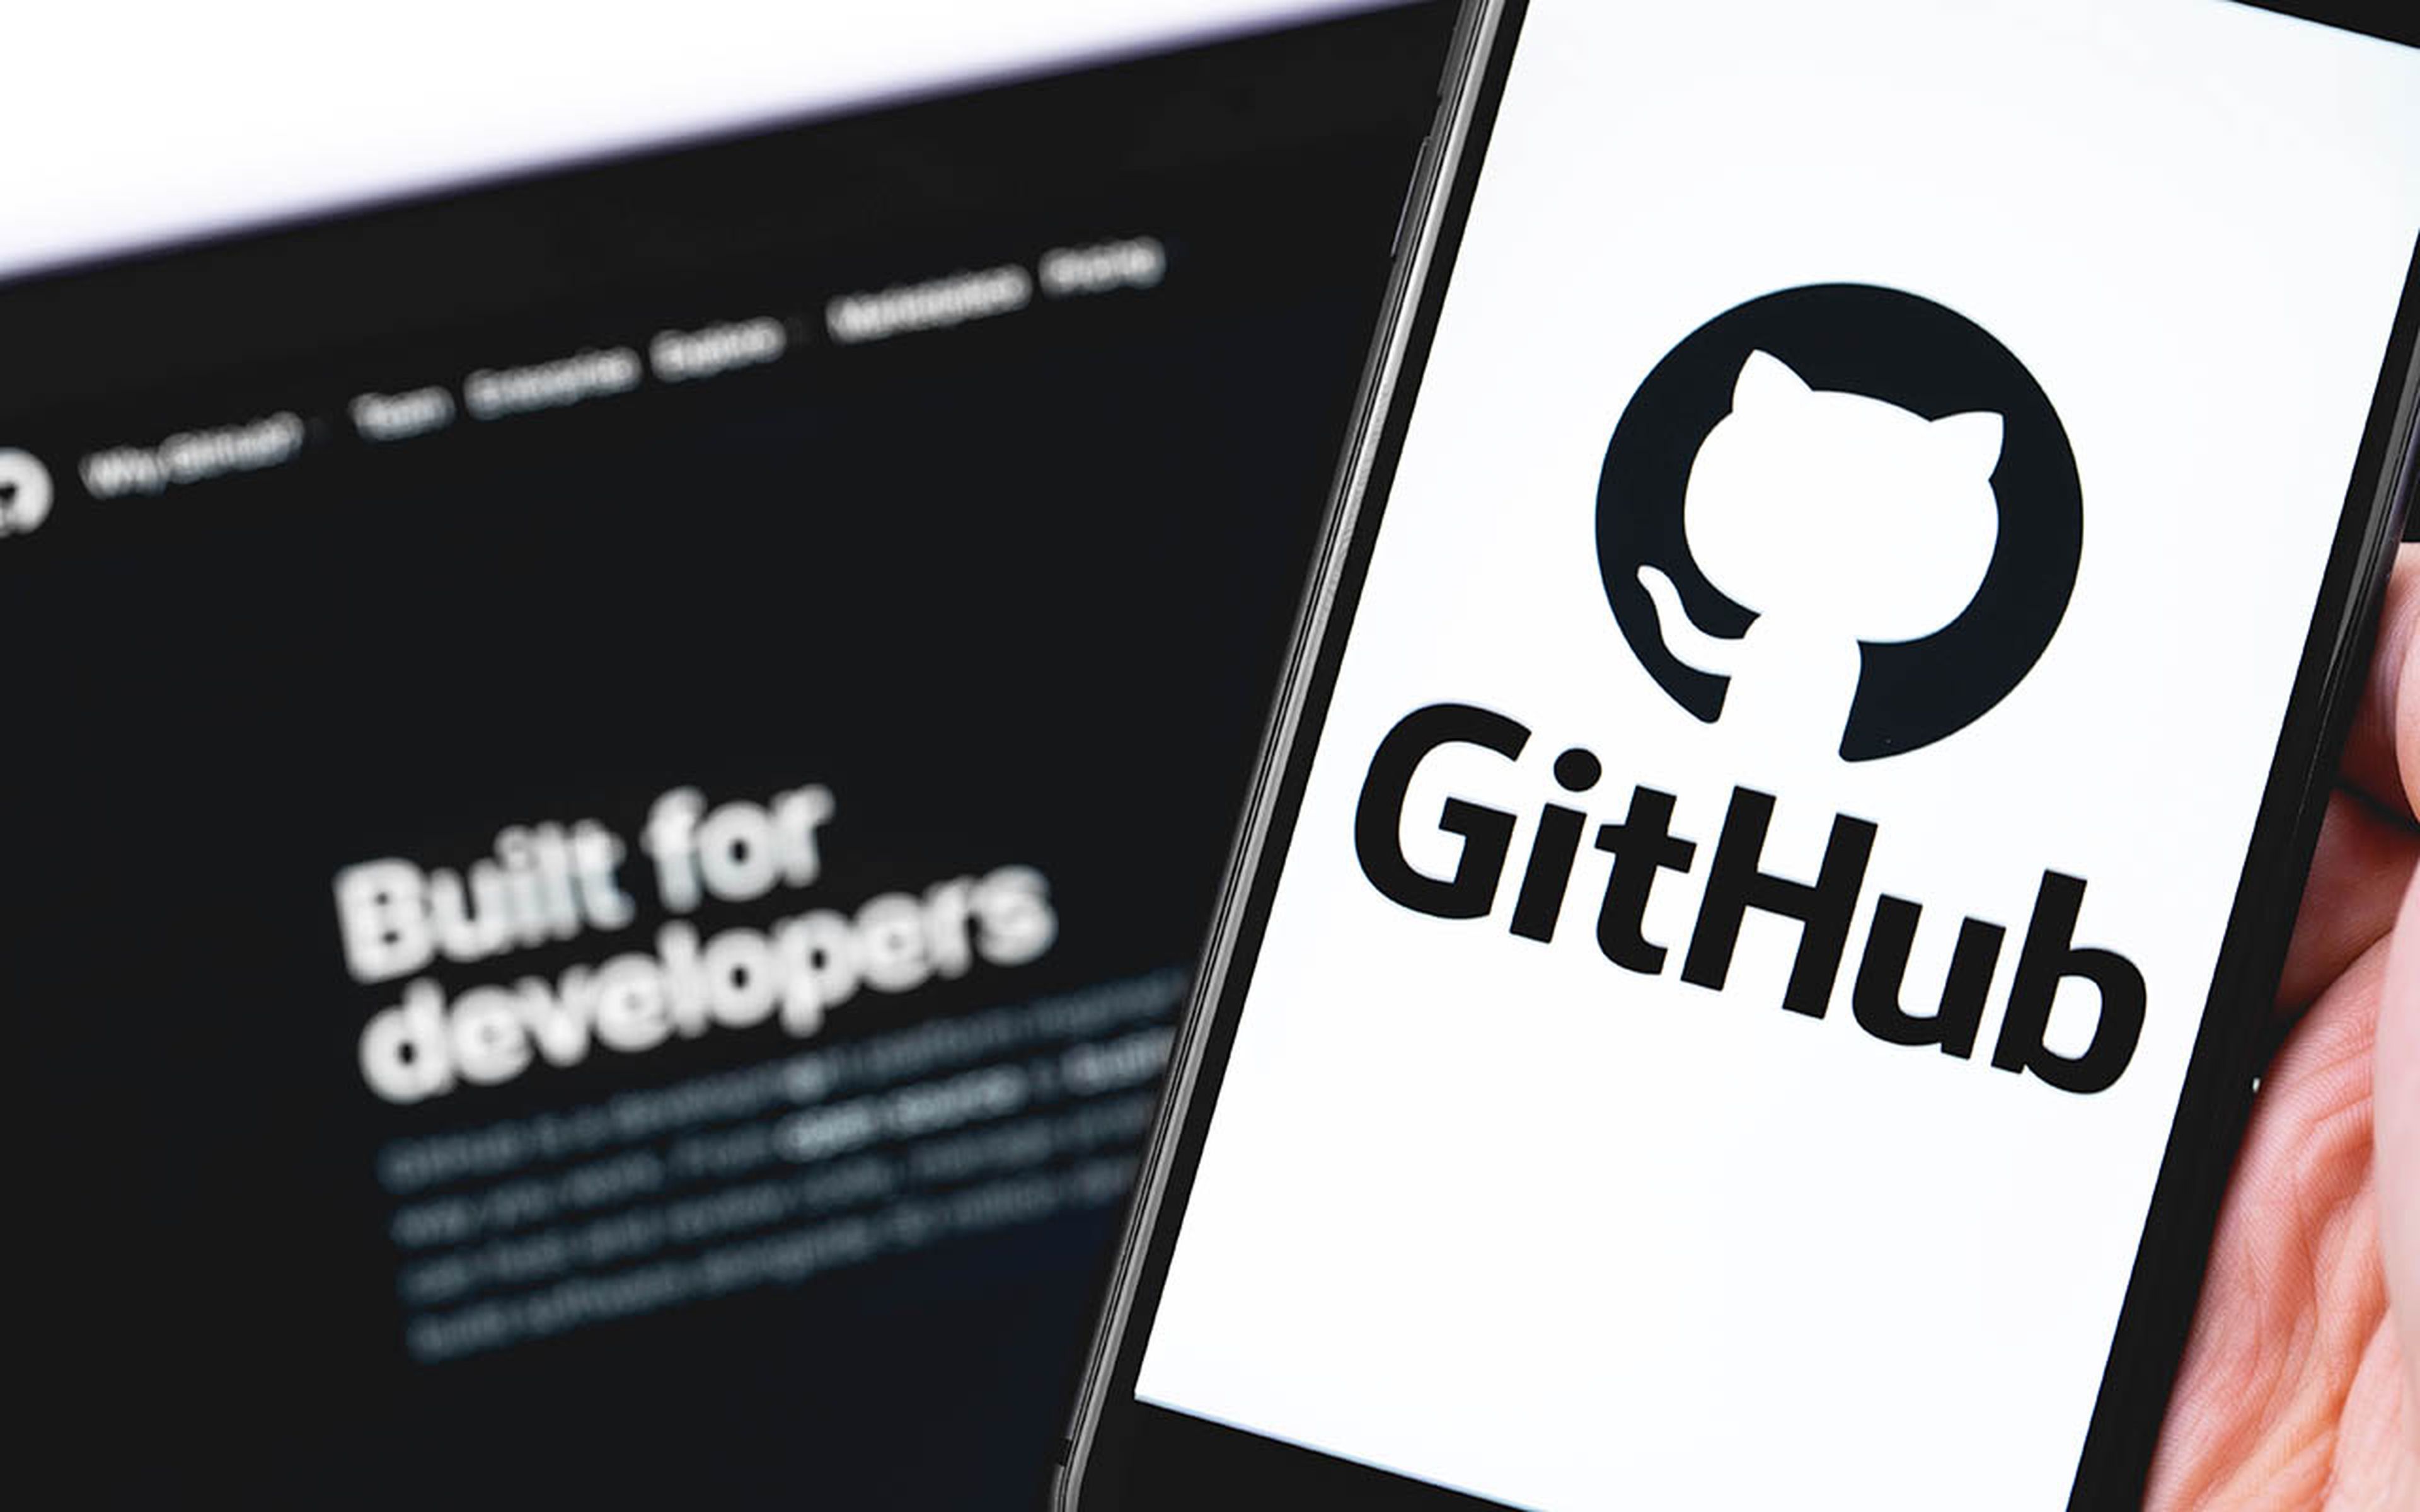 GitHub logo on the screen smartphone and notebook closeup.